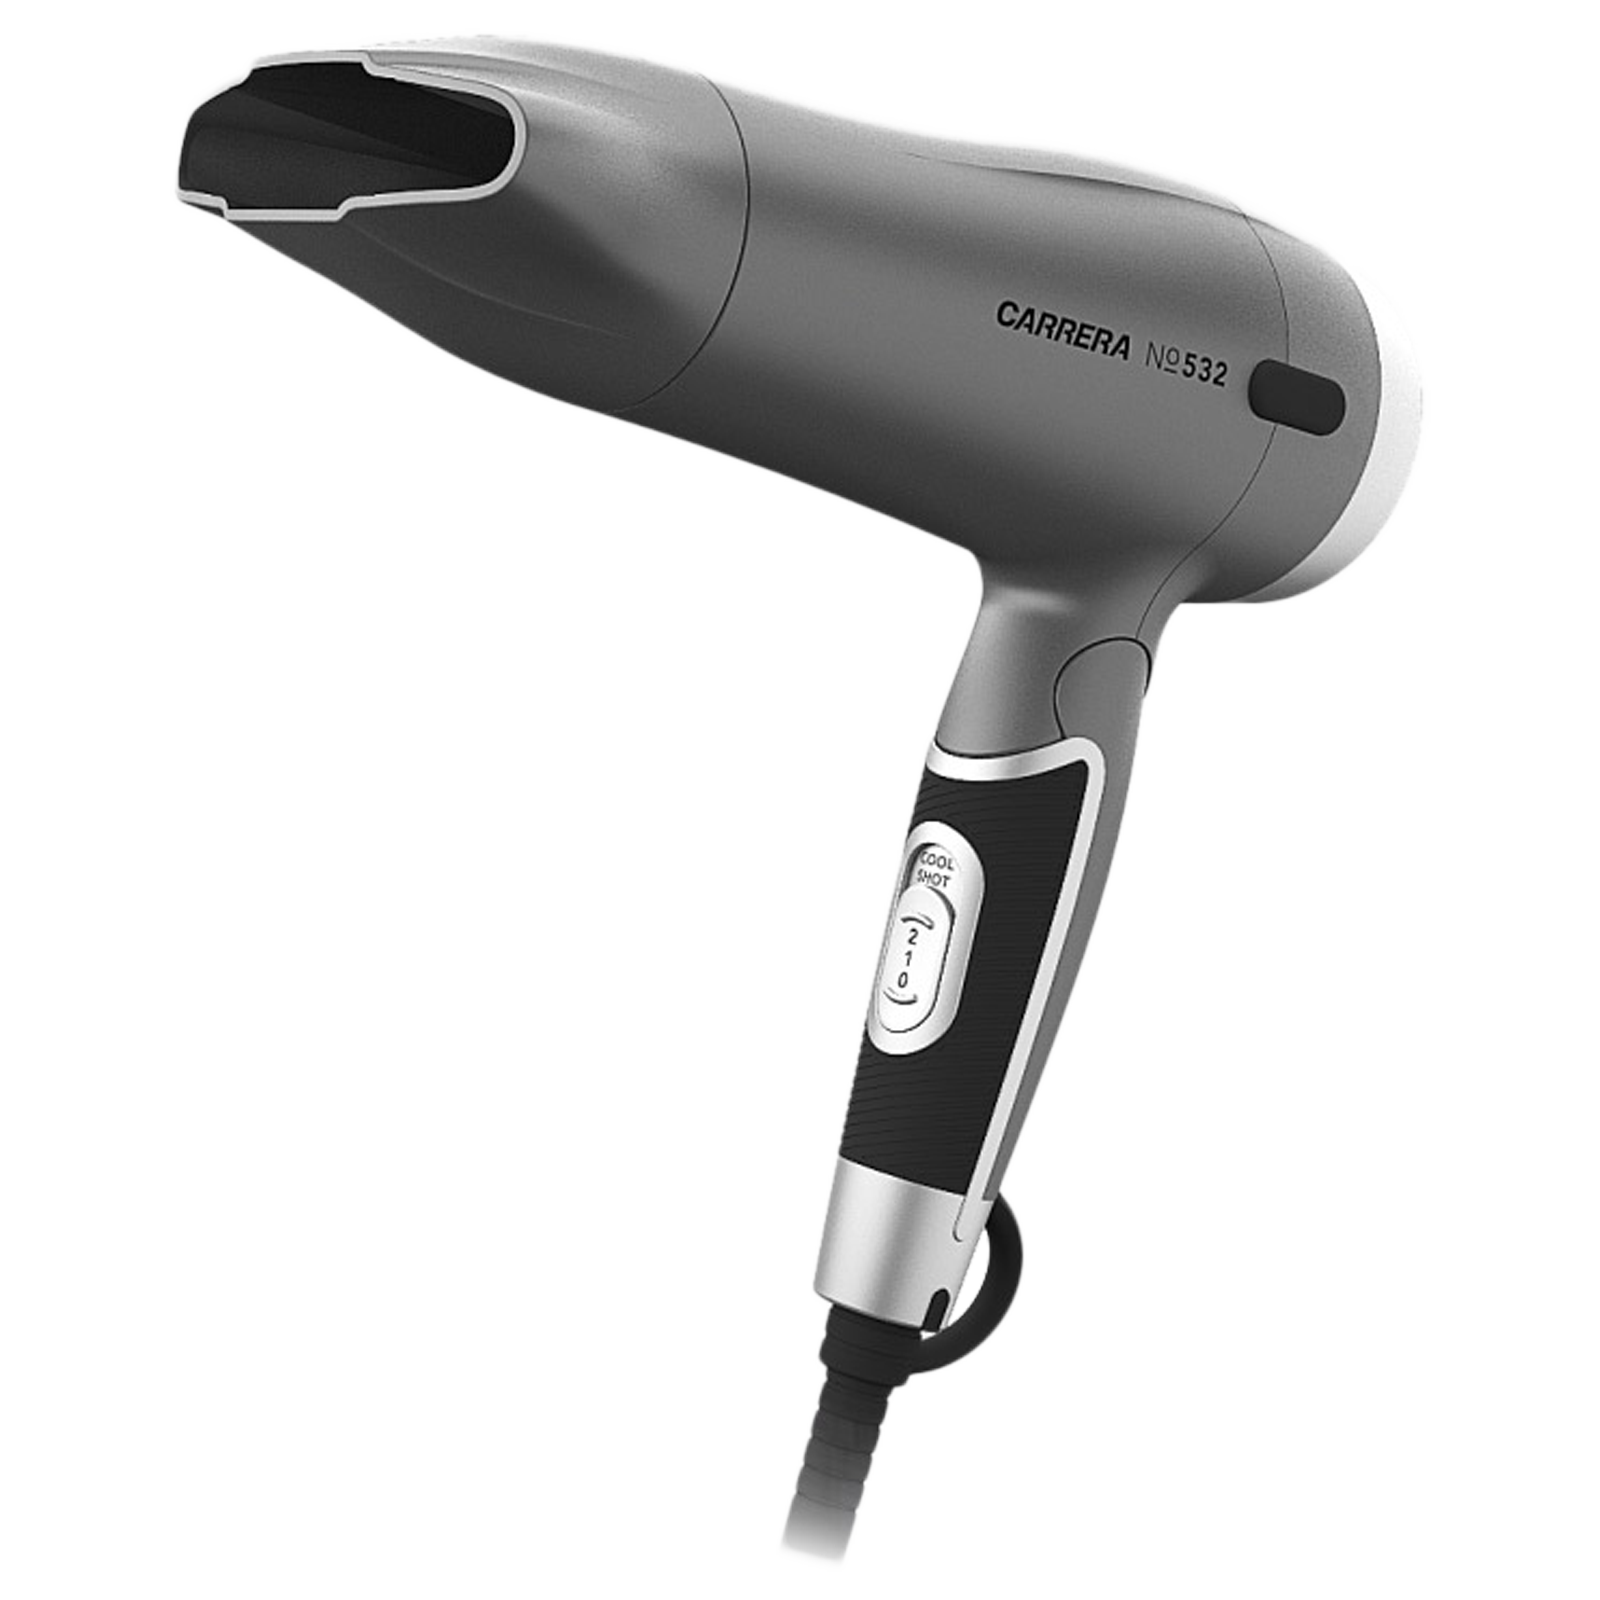 Carrera 2 Setting Hair Dryer (Hot and Cold Air Flow, CRR 532, Black)